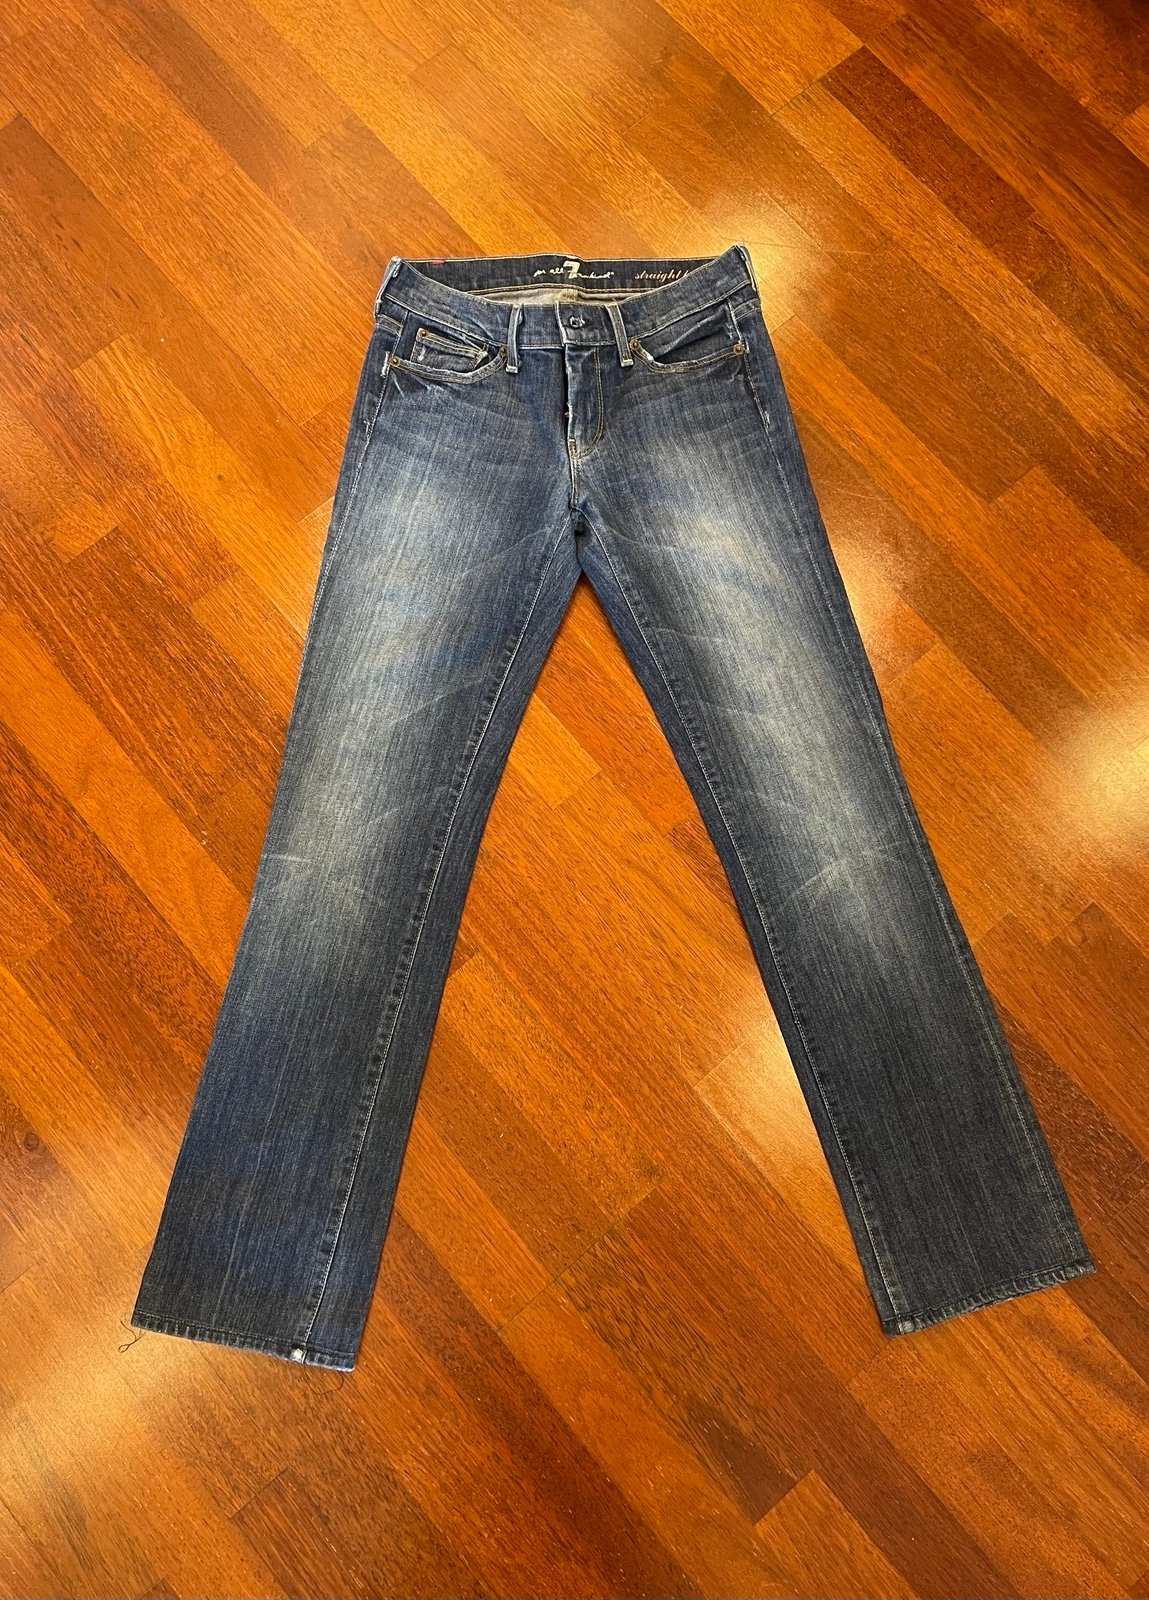 High quality 7 for all mankind jeans - Women Size 25 mV